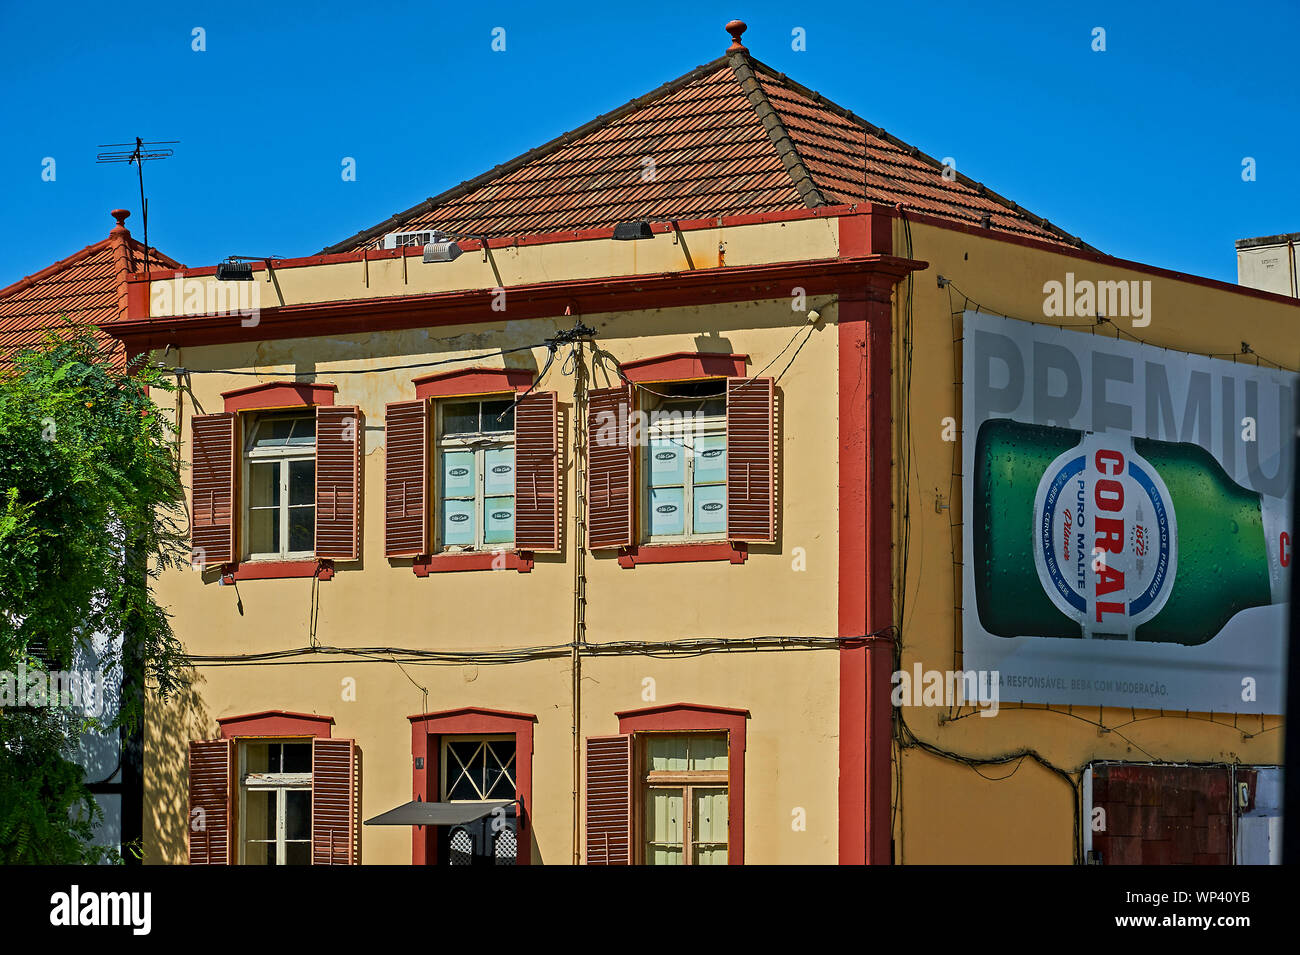 Funchal, Madeira and a large advertising sign for Coral beer on the side of a building. Stock Photo